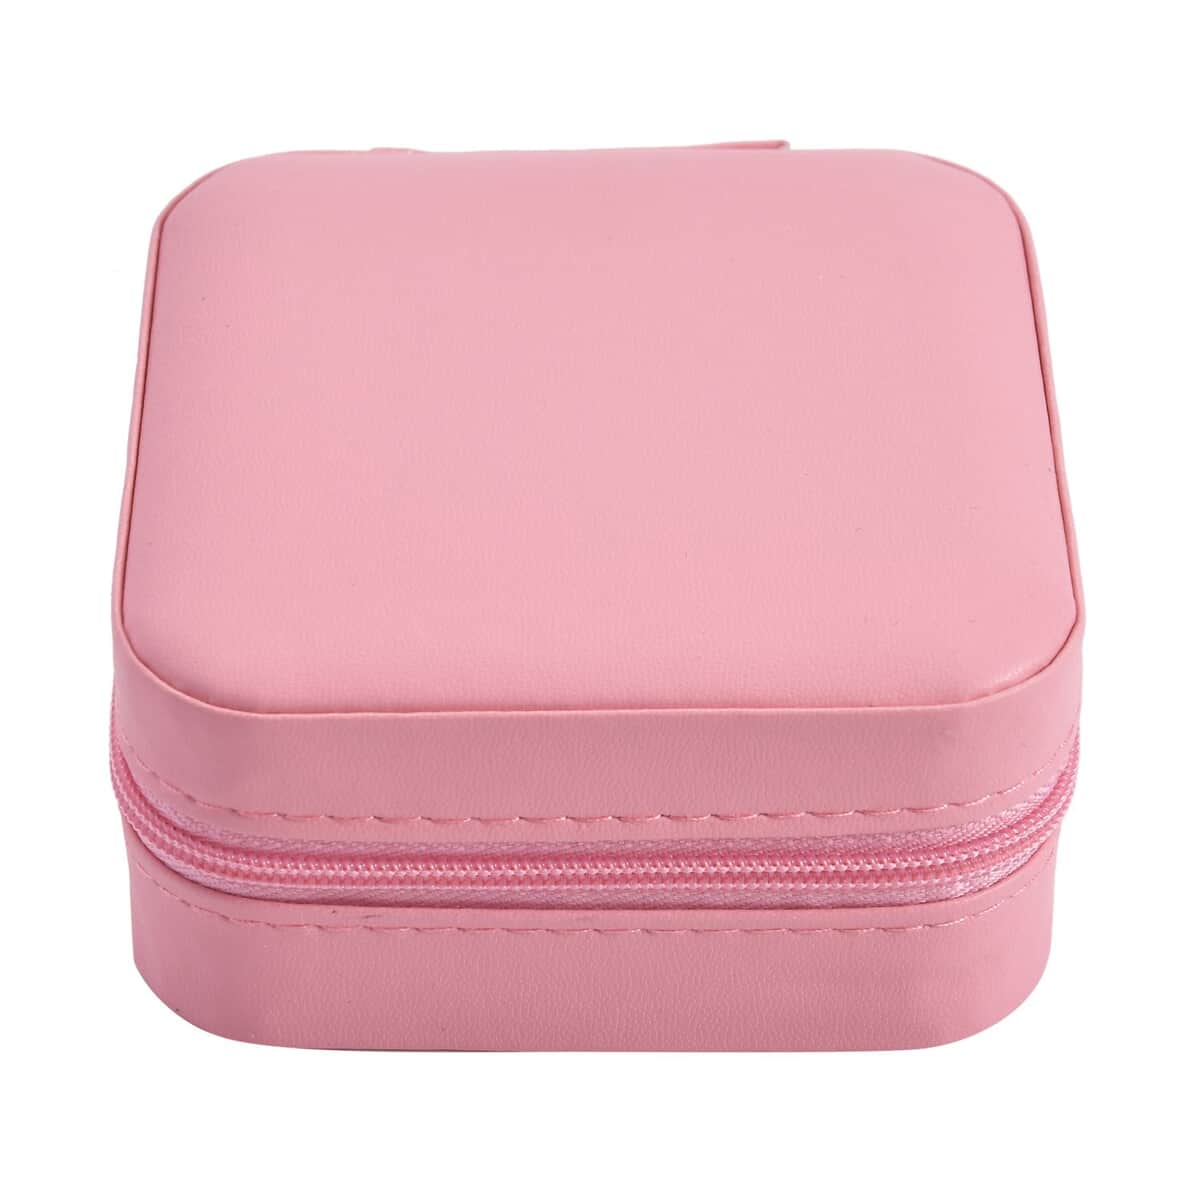 Pink Faux Leather Travel Jewelry Organizer with Zipper (3.94"x3.94"x1.97") image number 2